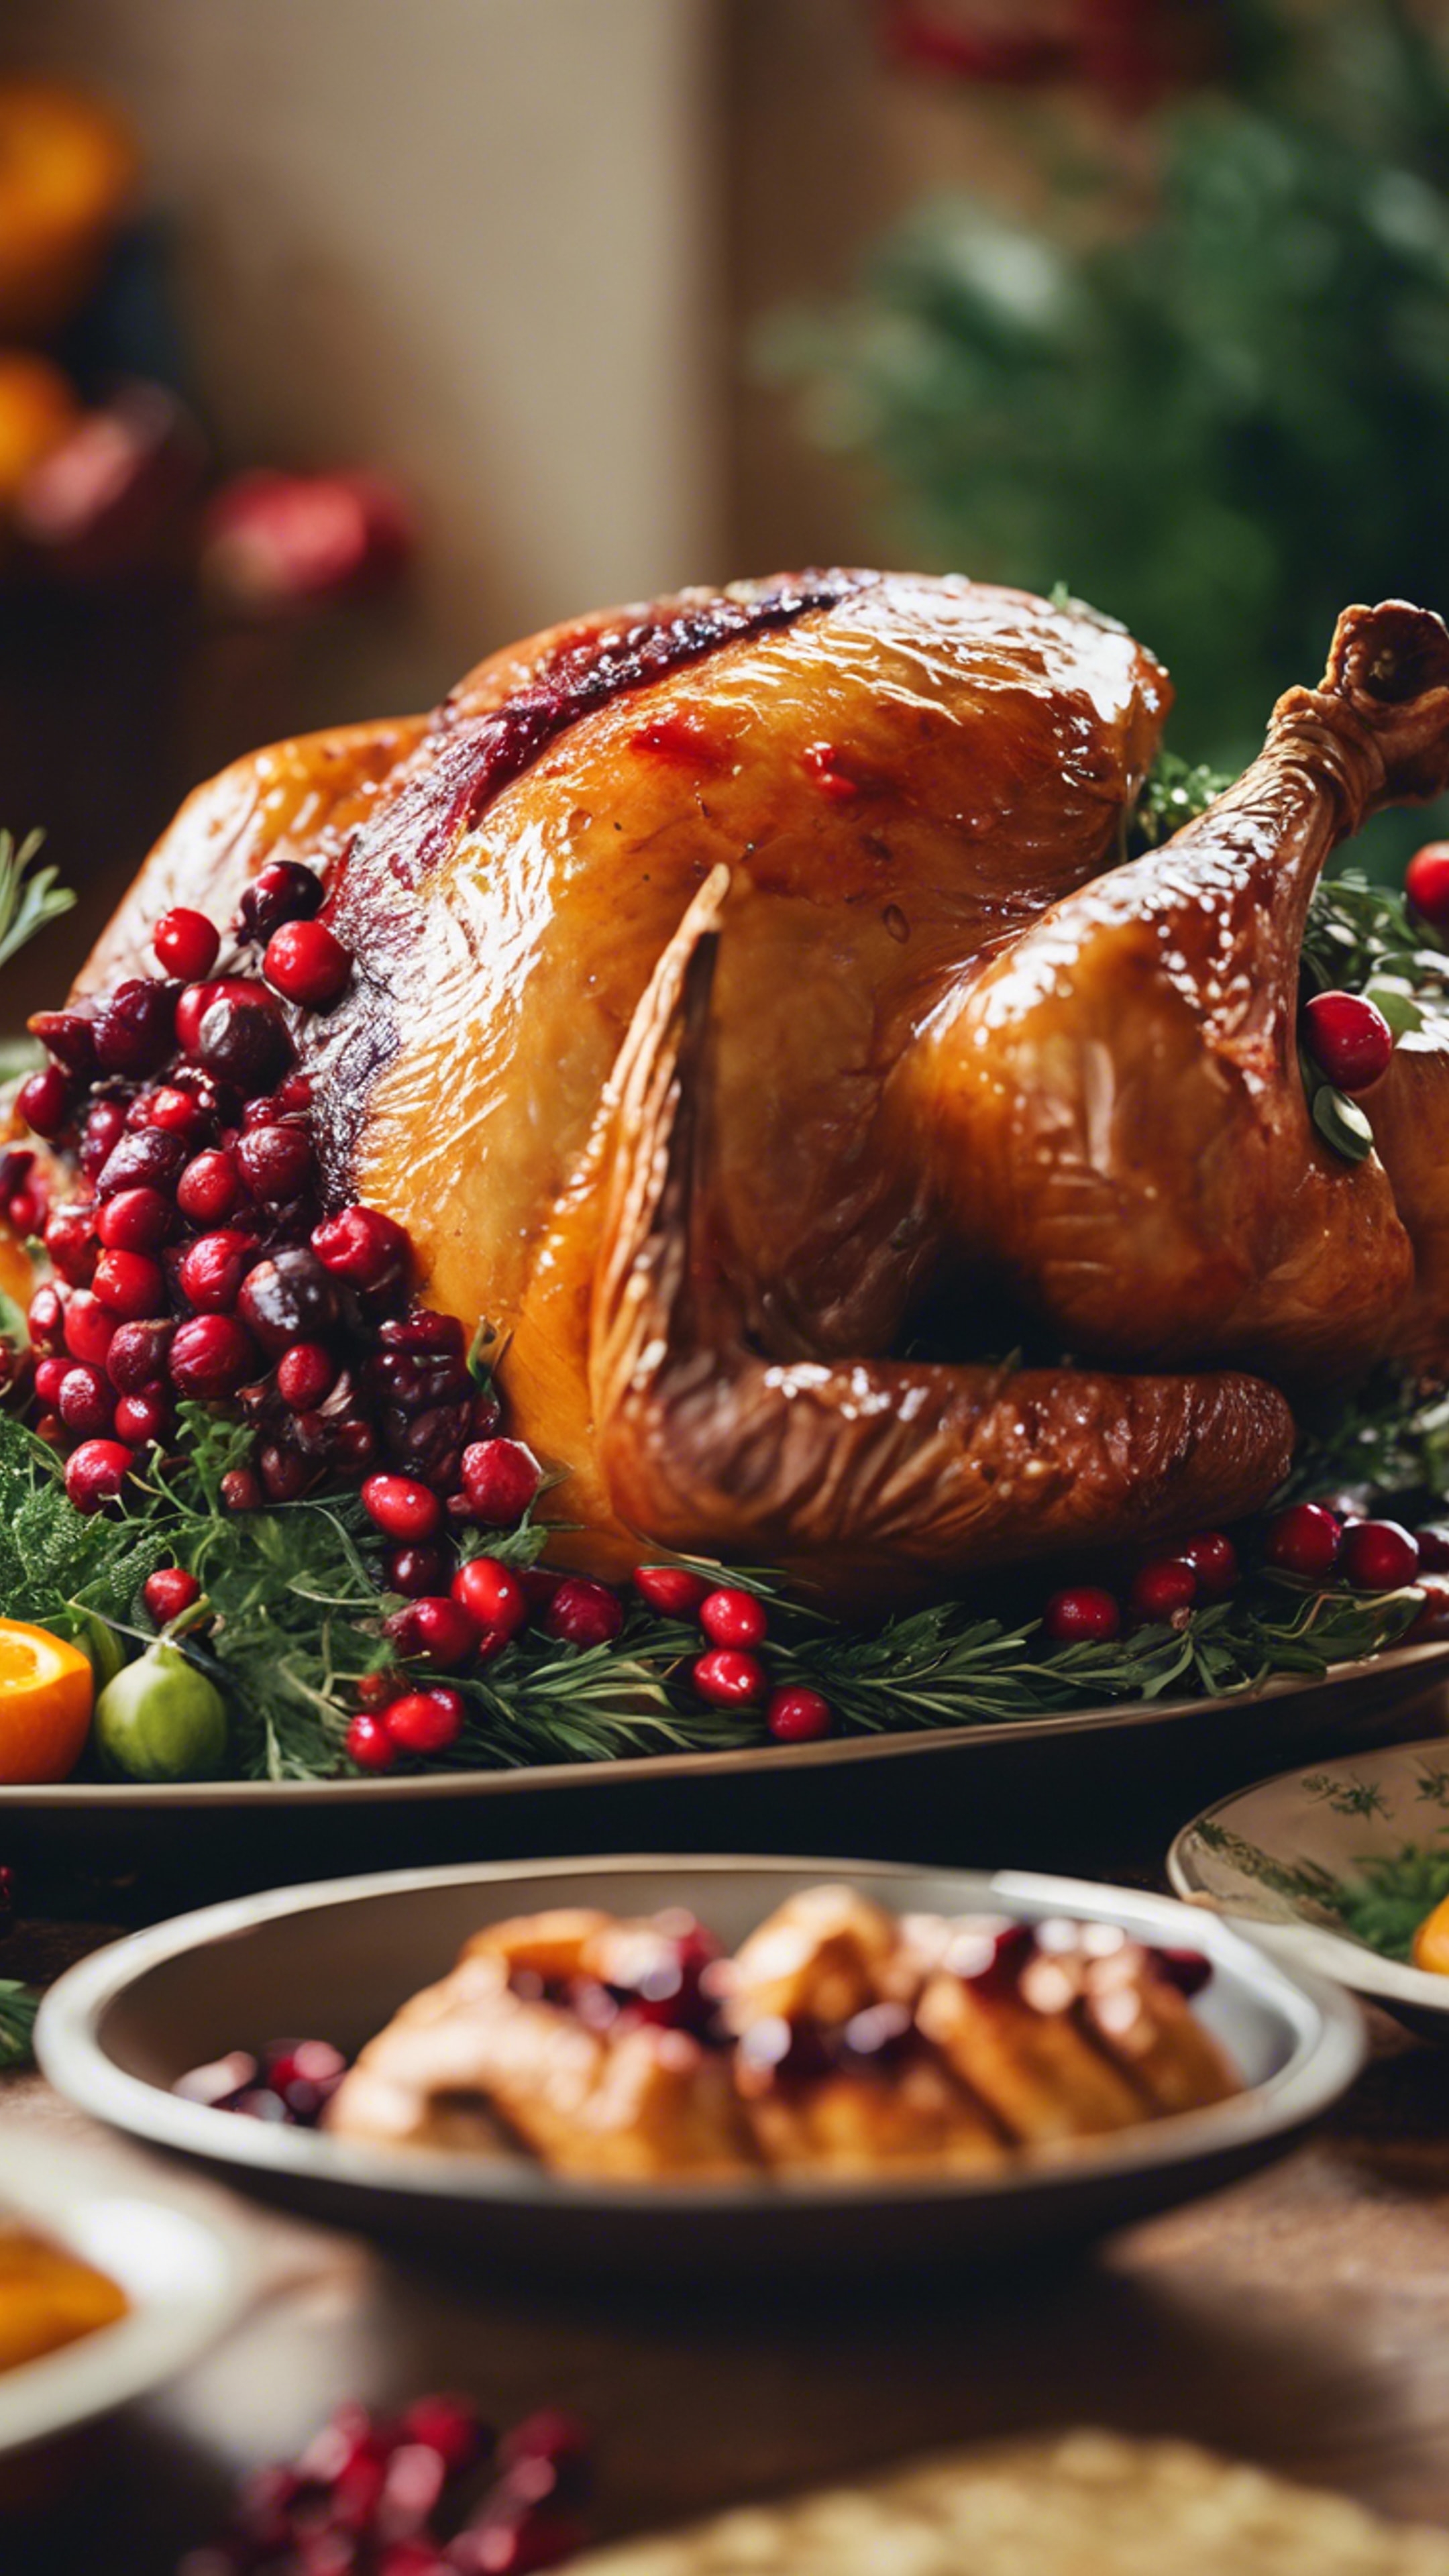 An artistic close-up of a traditional roast turkey on a Thanksgiving table, garnished with cranberries and herbs. Tapet[f7ada081b7d5471b890d]